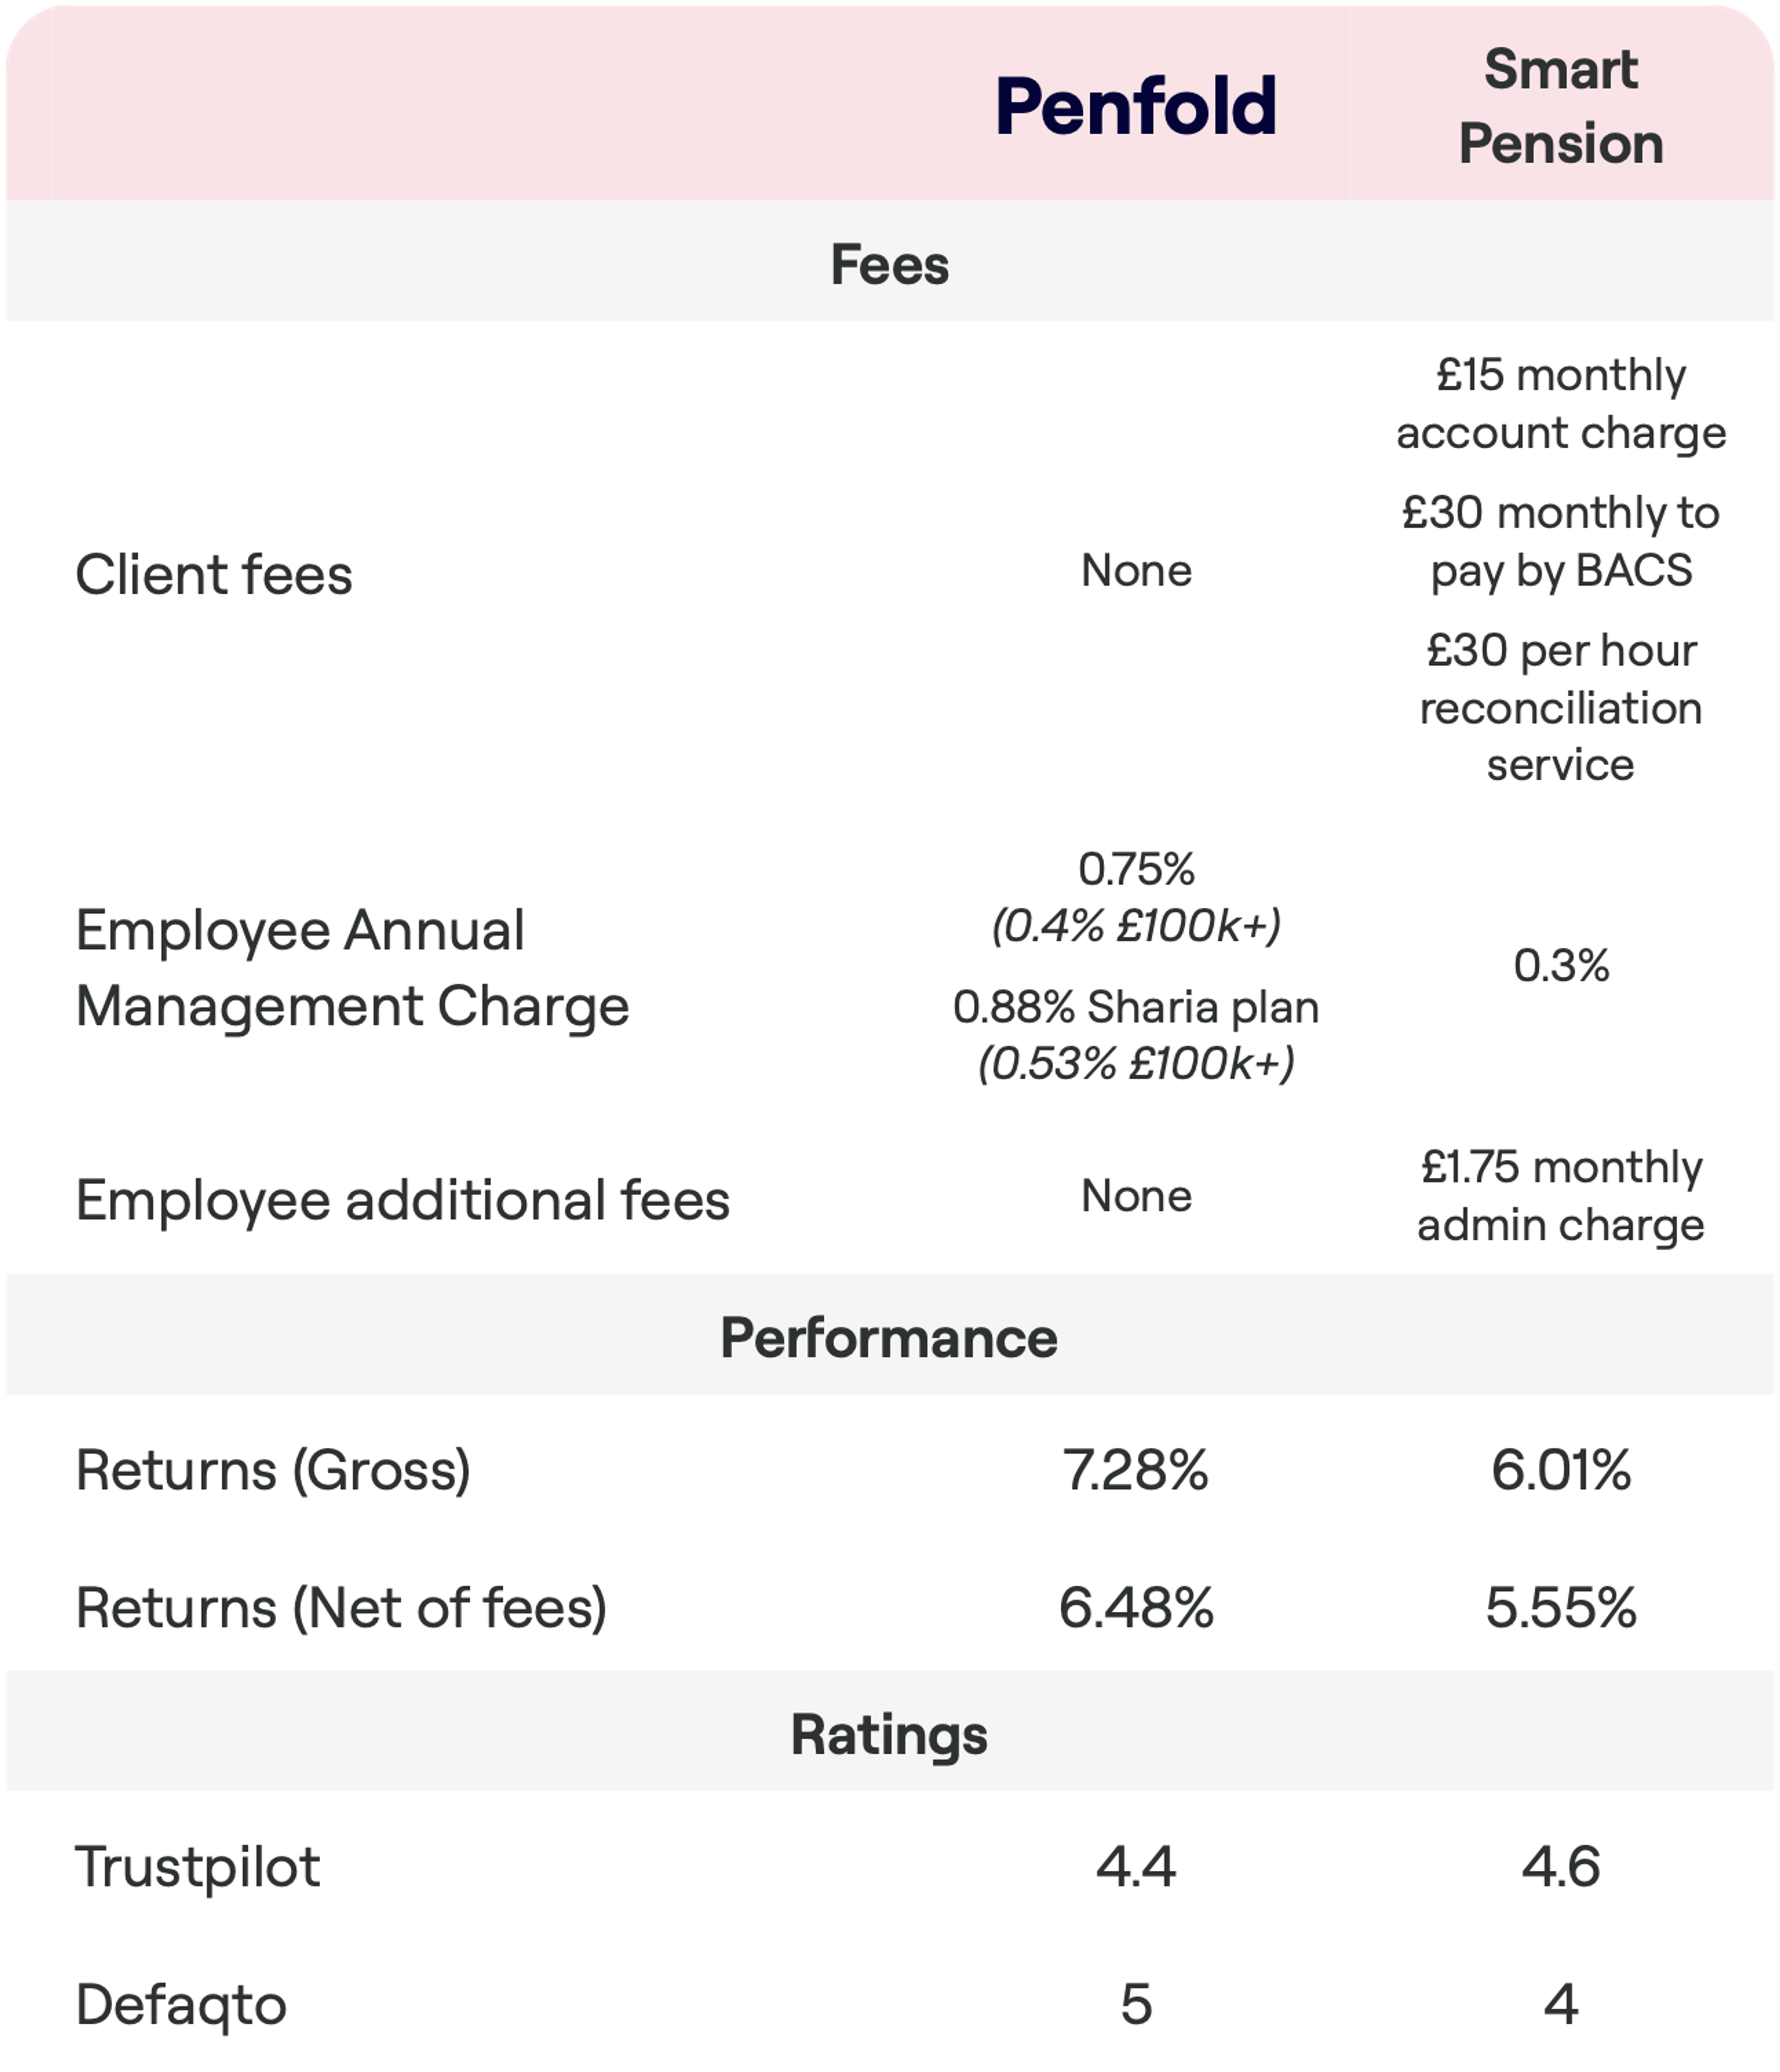 A comparison chart detailing fees, performance, and ratings for Penfold and Smart Pension. Penfold has no client fees, while Smart Pension has various charges including £15 monthly account charge. The Employee Annual Management Charge for Penfold is 0.75% (0.4% for amounts over £100k) and for Smart Pension is 0.3%. Performance shows returns of 4.29% for Penfold and 3.93% for Smart Pension, with net returns slightly lower. Trustpilot ratings are 4.3 for Penfold and 4.5 for Smart Pension. Defaqto rates Penfold at 4 and Smart Pension at 5.